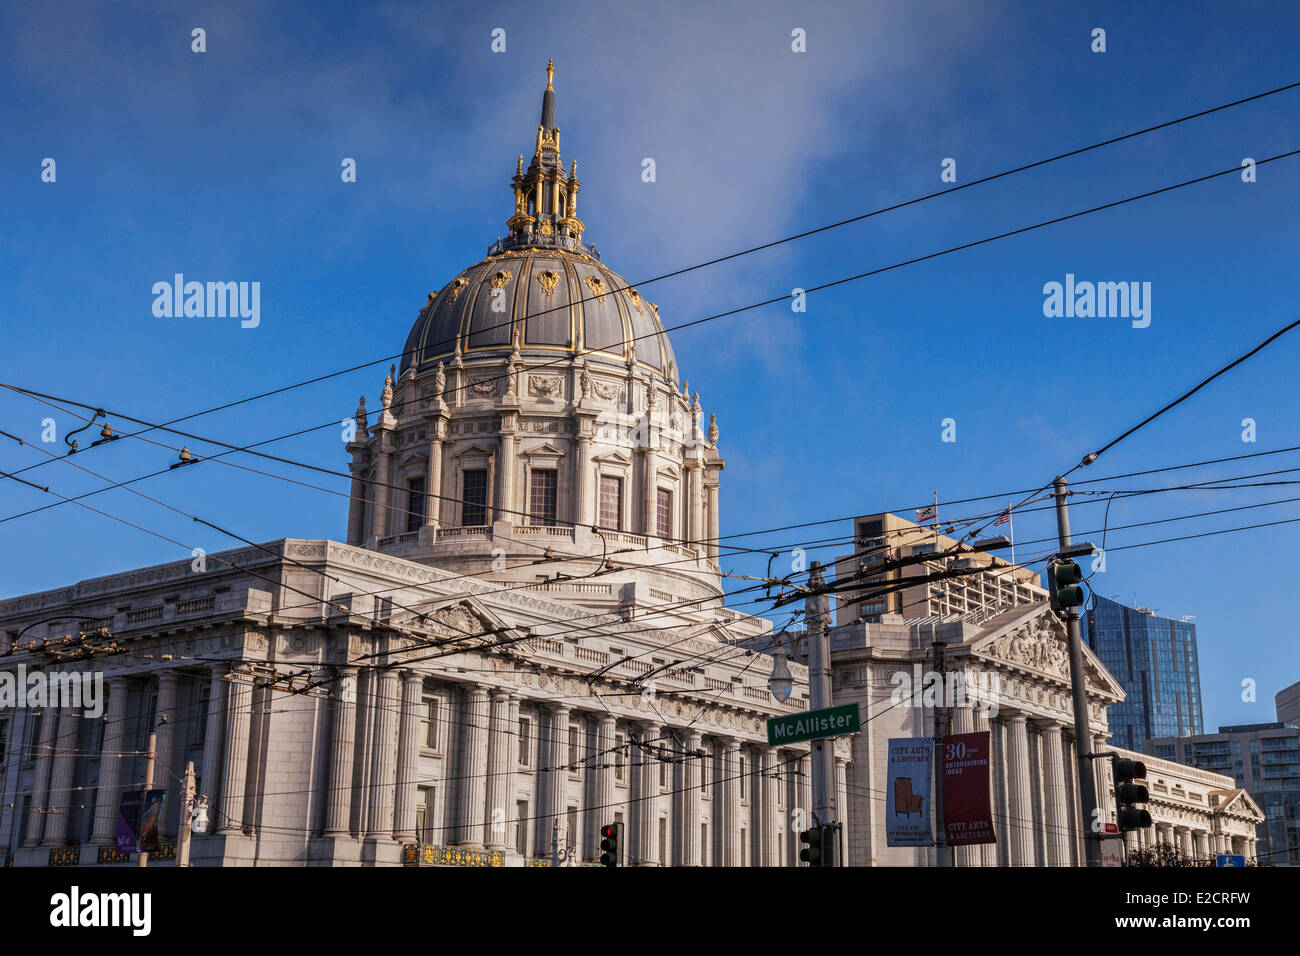 San Francisco City Hall, and overhead power lines for trolley bus. Stock Photo